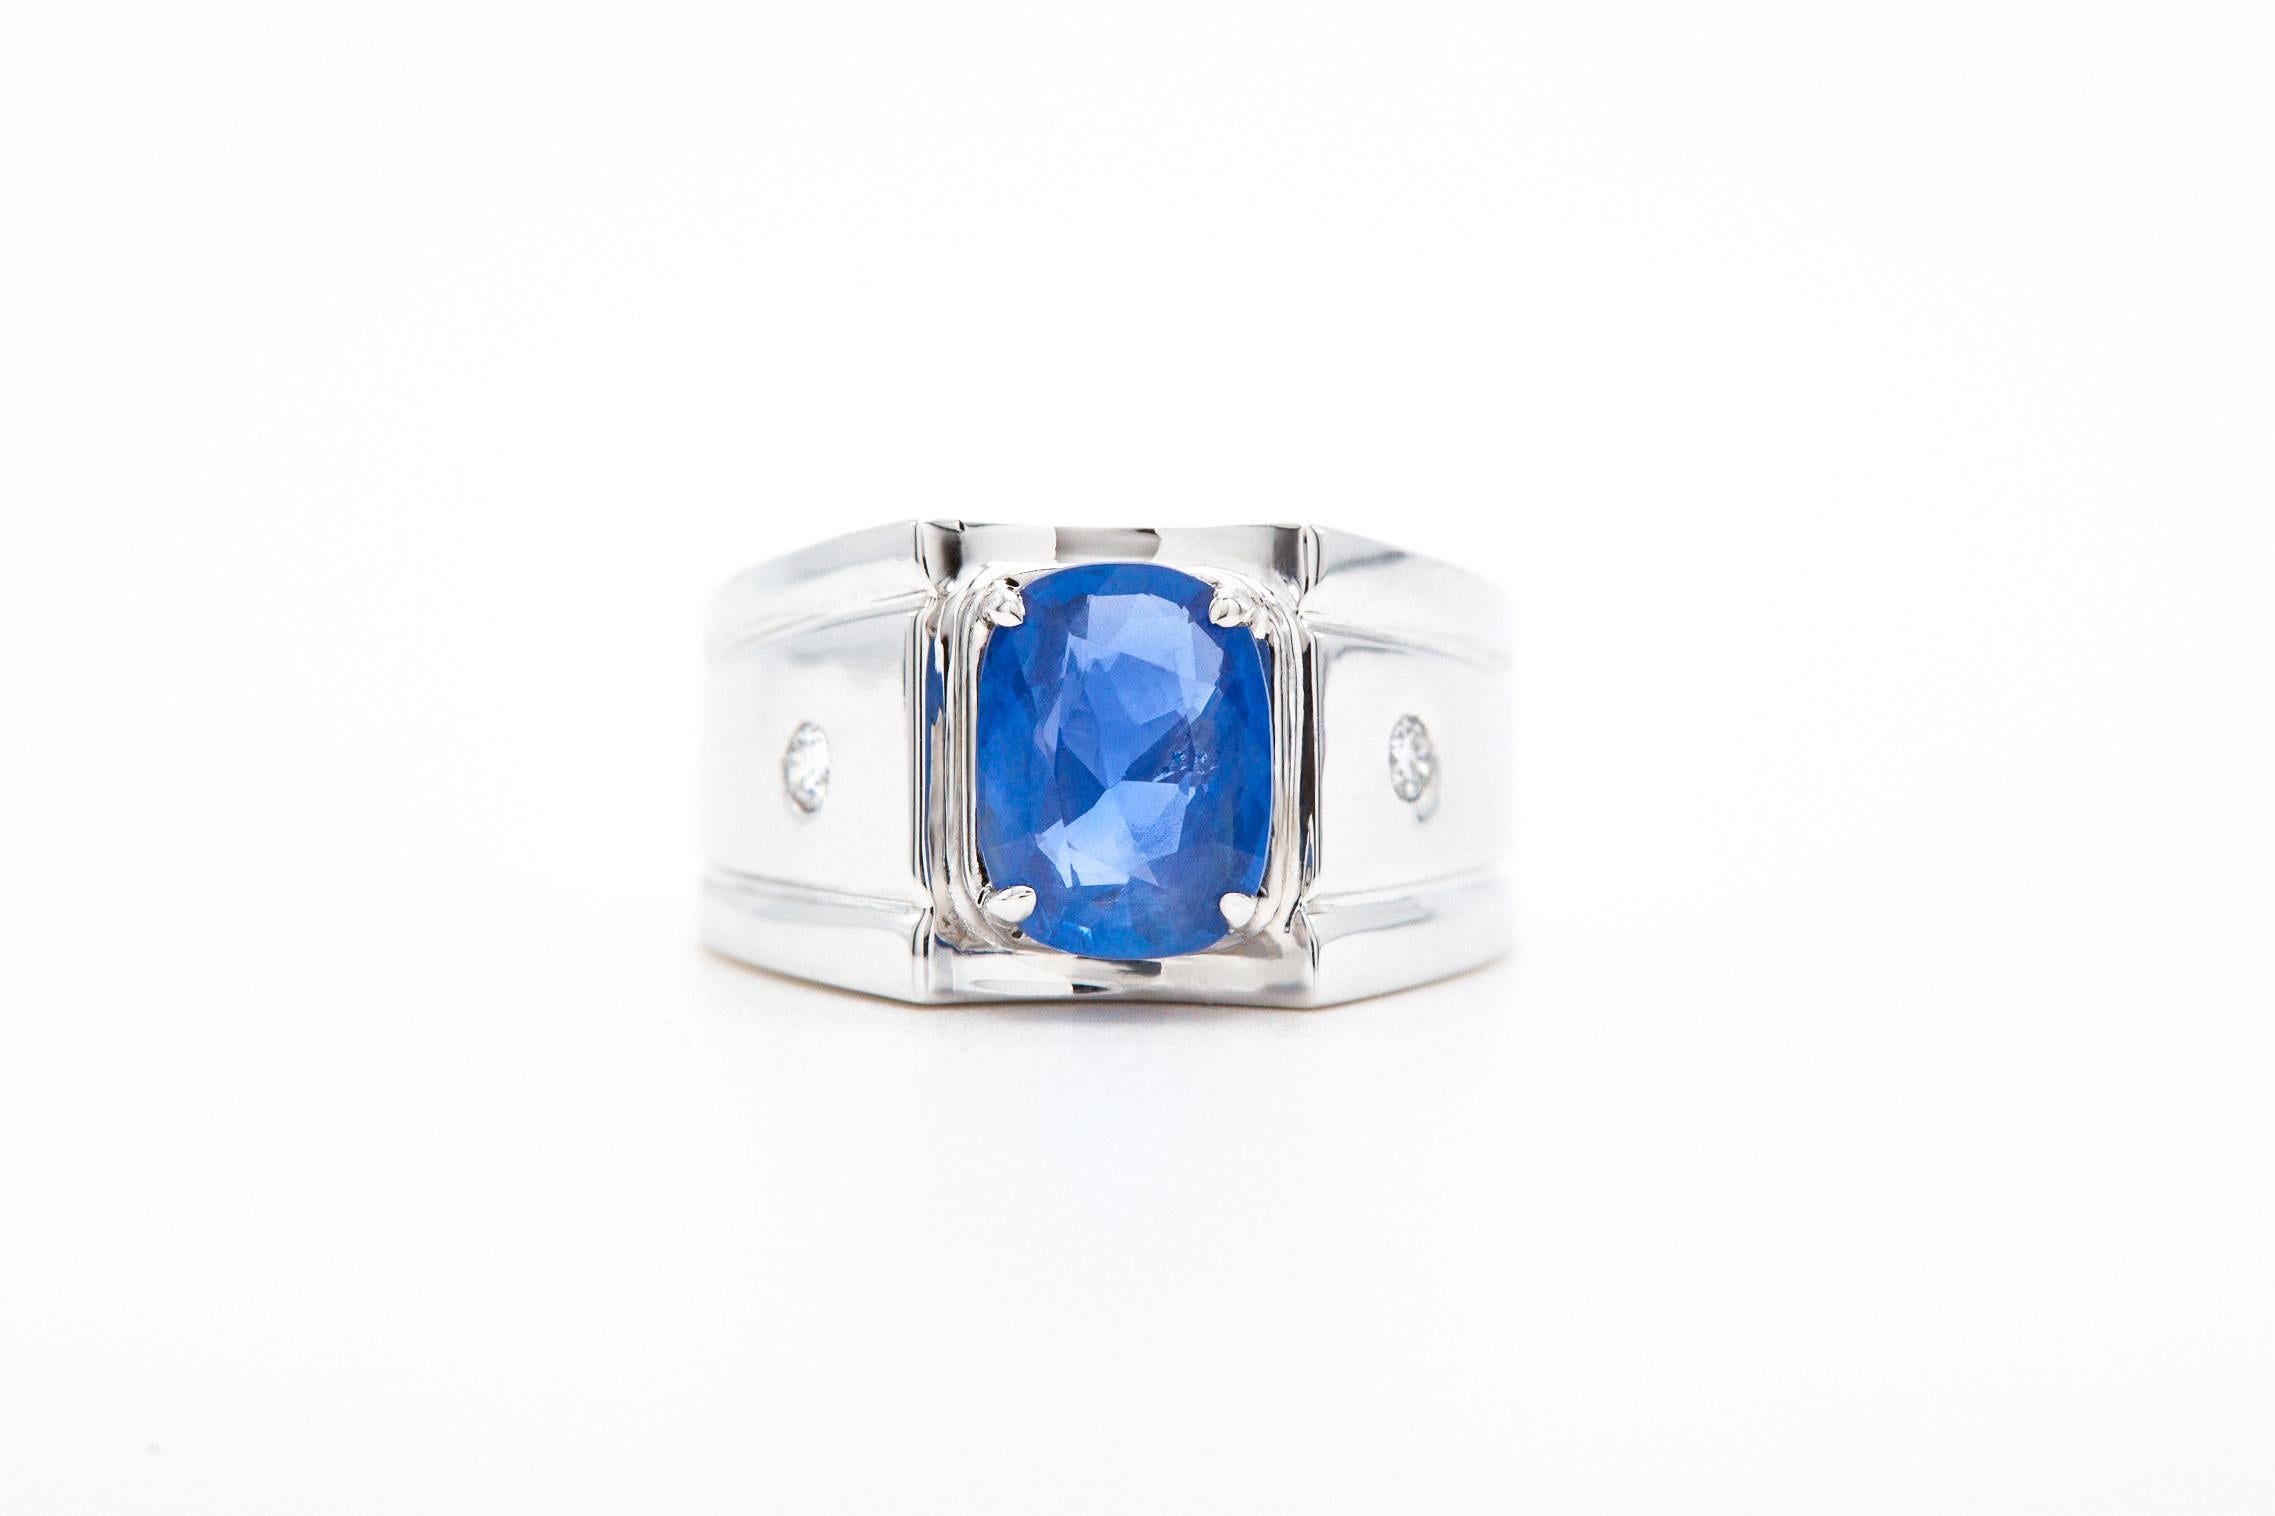 18K WHITE GOLD
2 ROUND DIAMONDS  | 0.06 CARATS 
1 BURMA NO HEAT SAPPHIRE | 2.53 CARATS 

Introducing the Sapphire Men's Ring, a cool and sophisticated piece crafted from 18K white gold. Featuring a stunning 2.53-carat Burma No Heat Sapphire, this